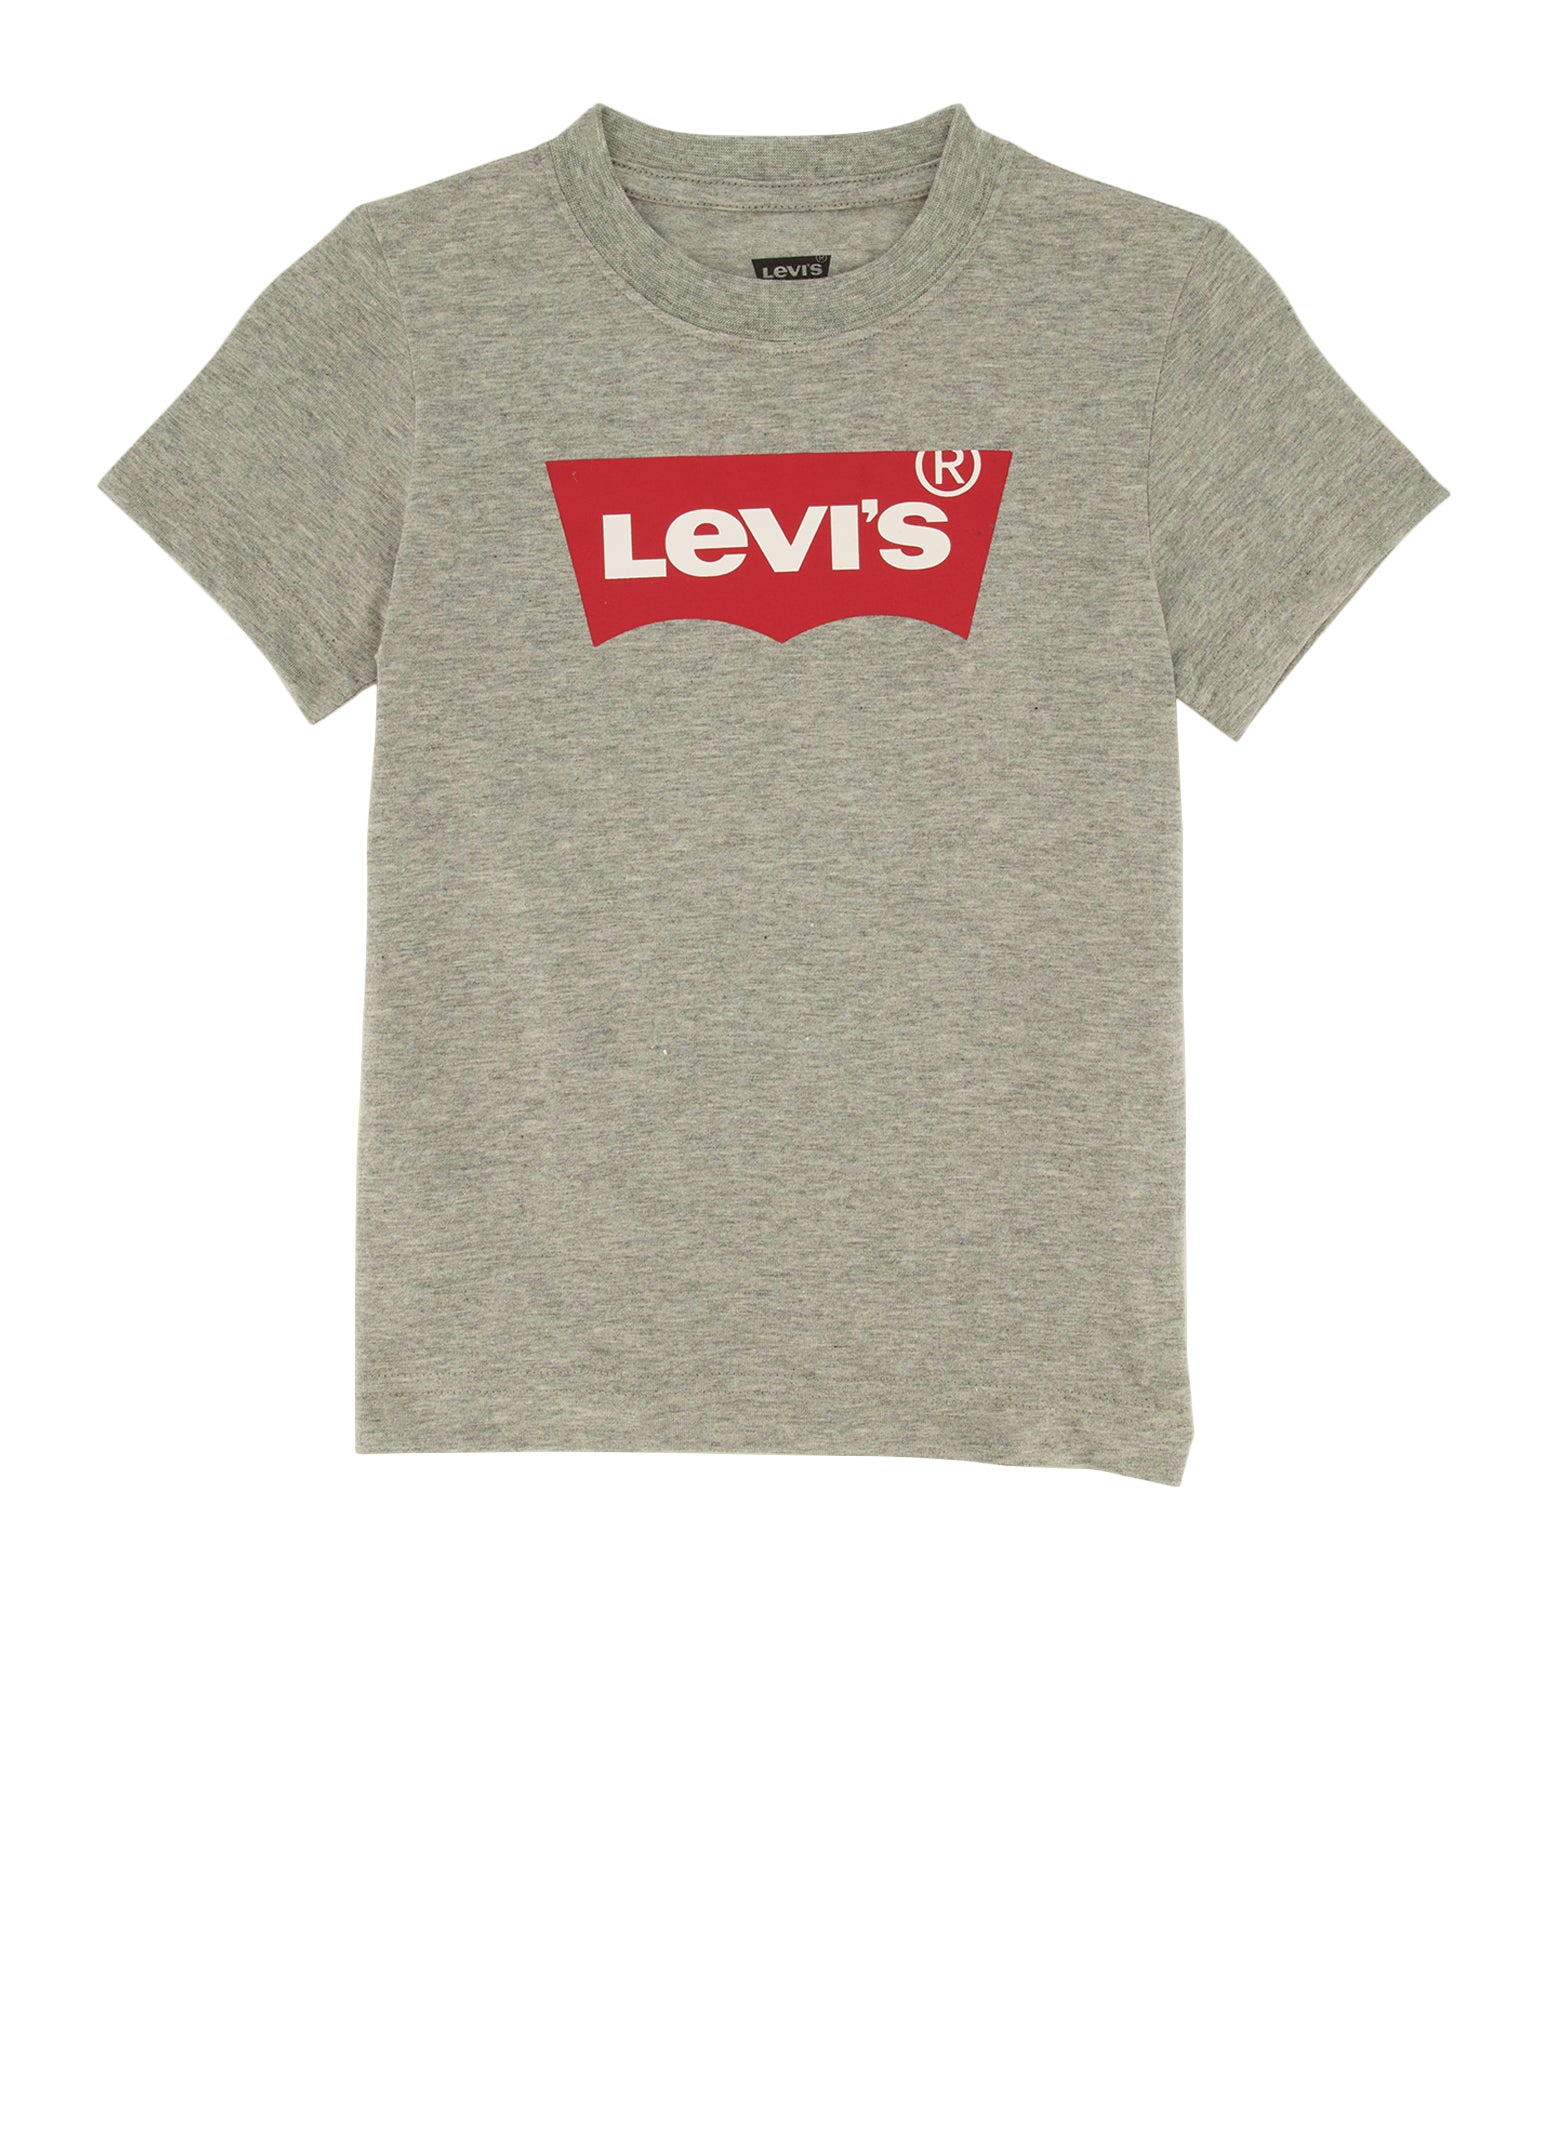 Little Boys Levis Classic Logo Graphic Tee, Grey, Size 7